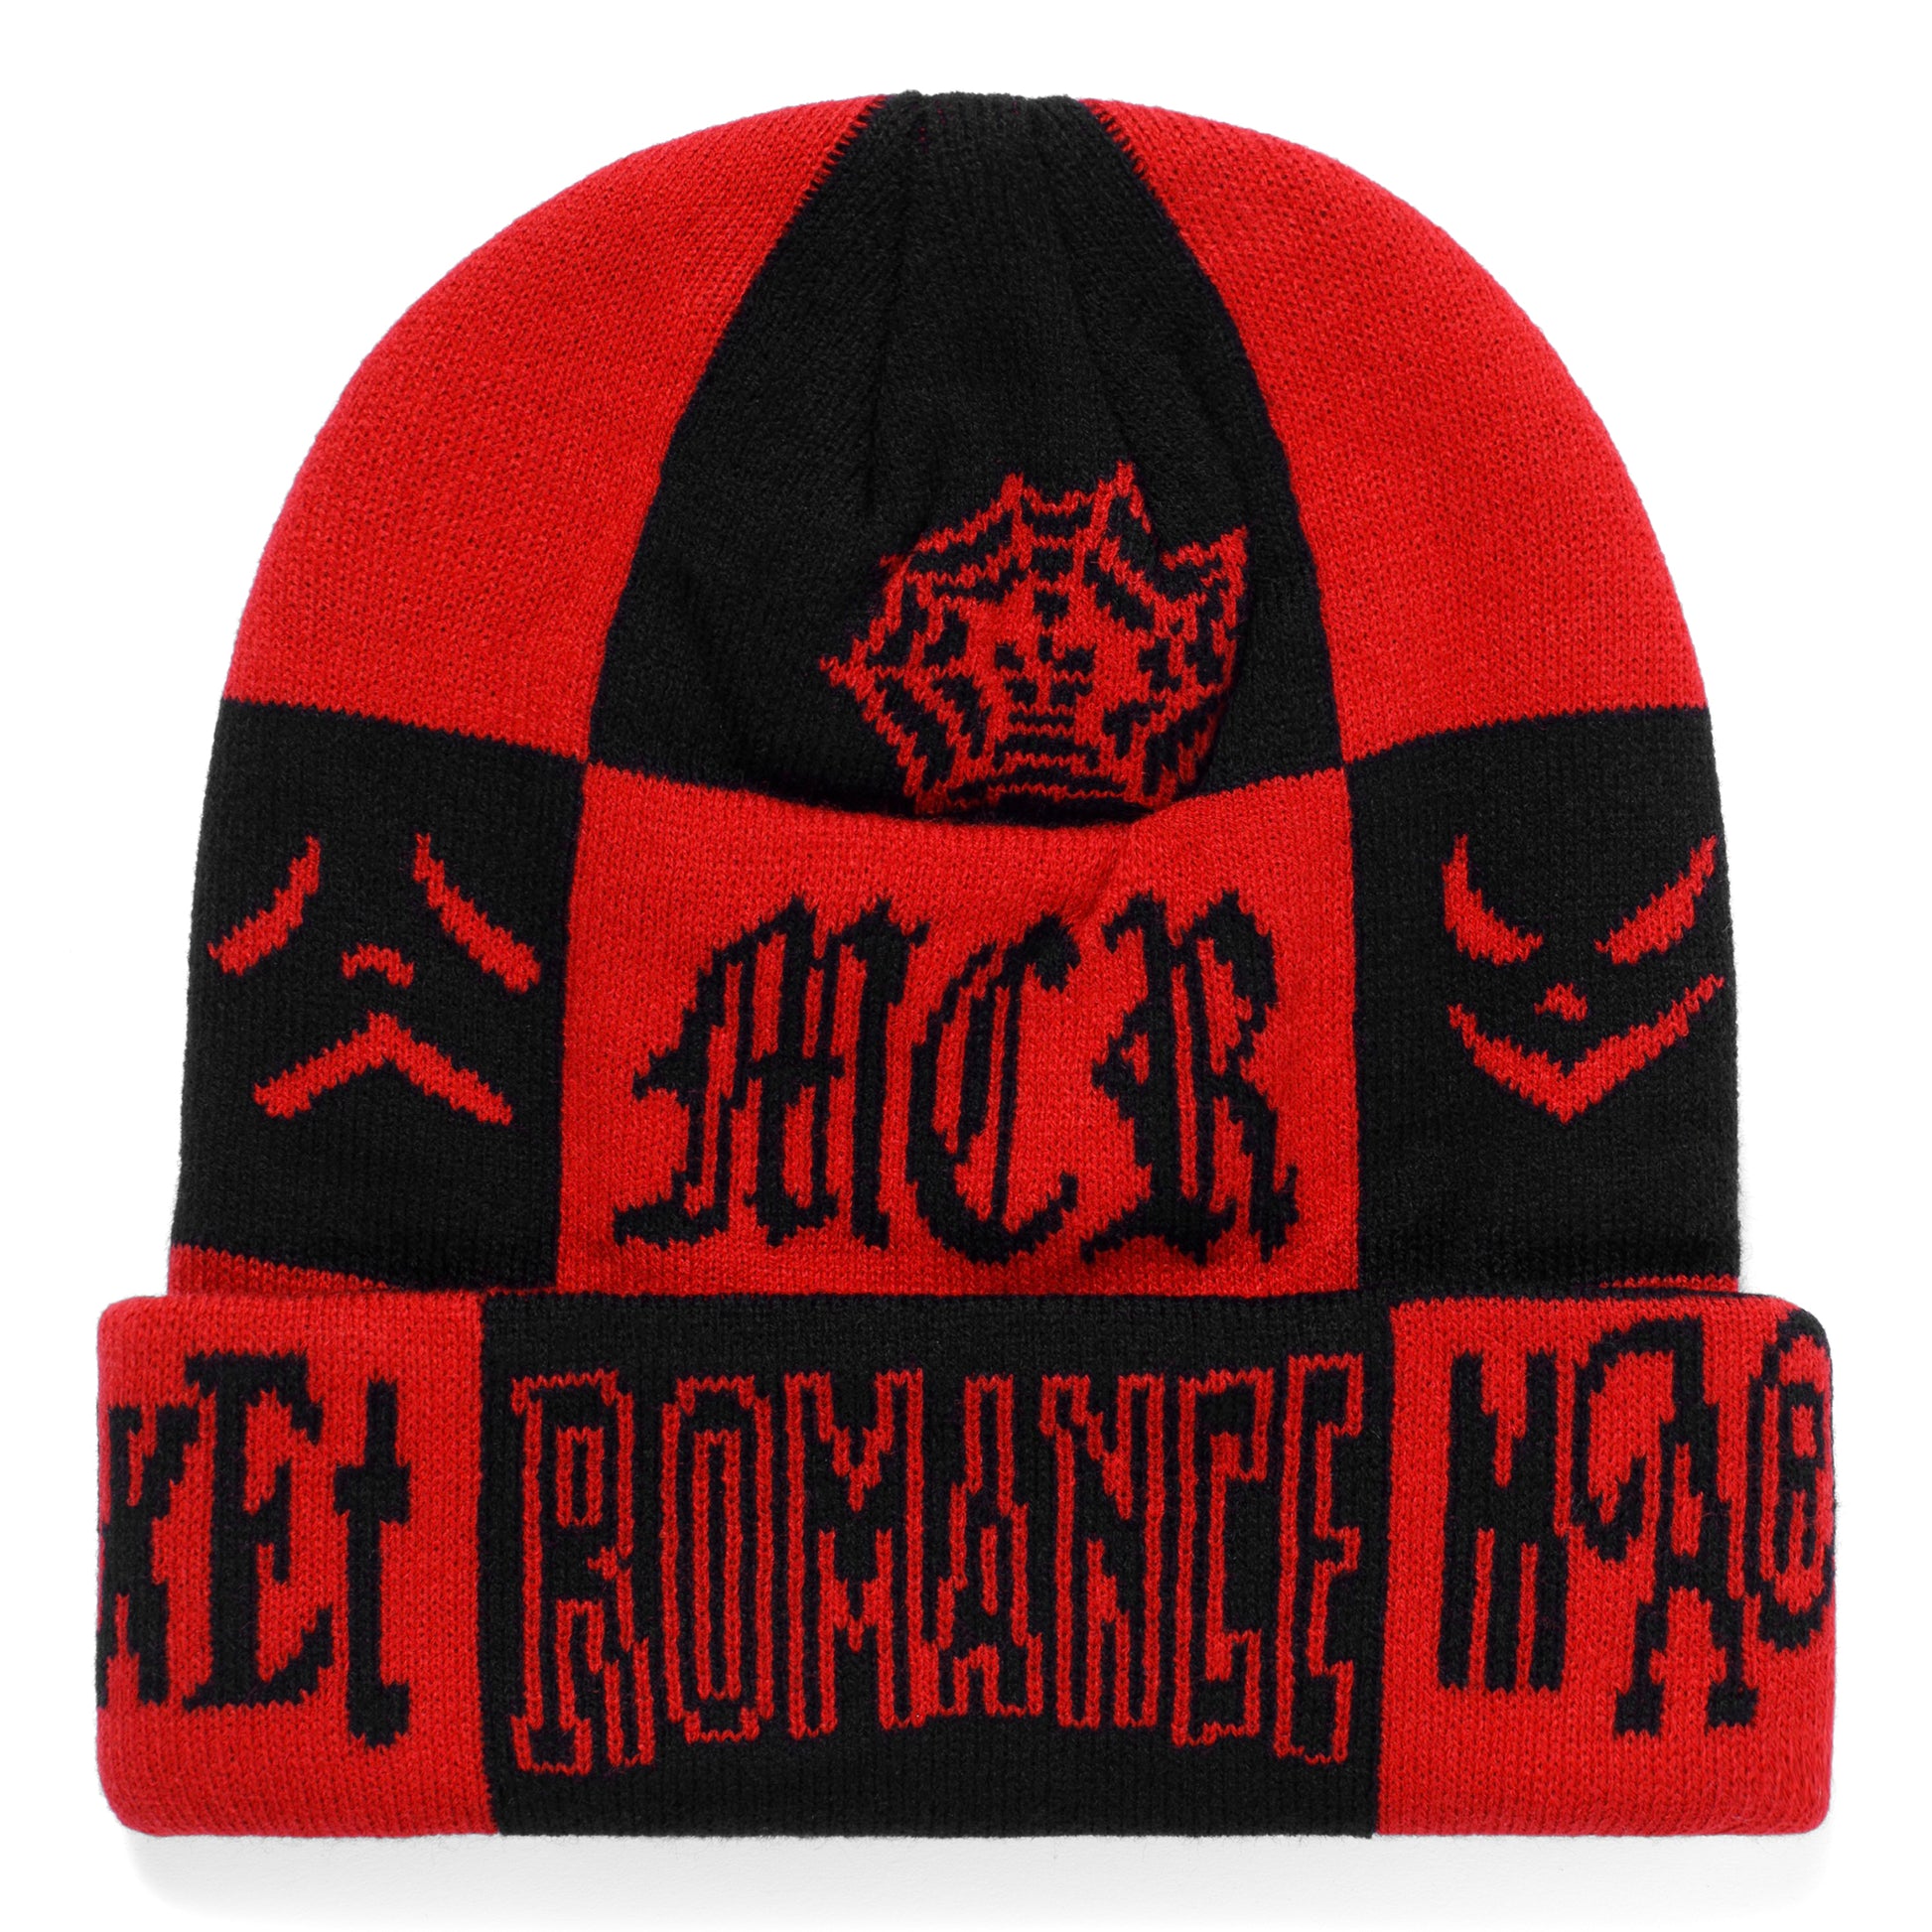 MARKET clothing brand MCR CHECKERED SPIDER WEB BEANIE. Find more graphic tees, hats, beanies, hoodies at MarketStudios.com. Formally Chinatown Market. 